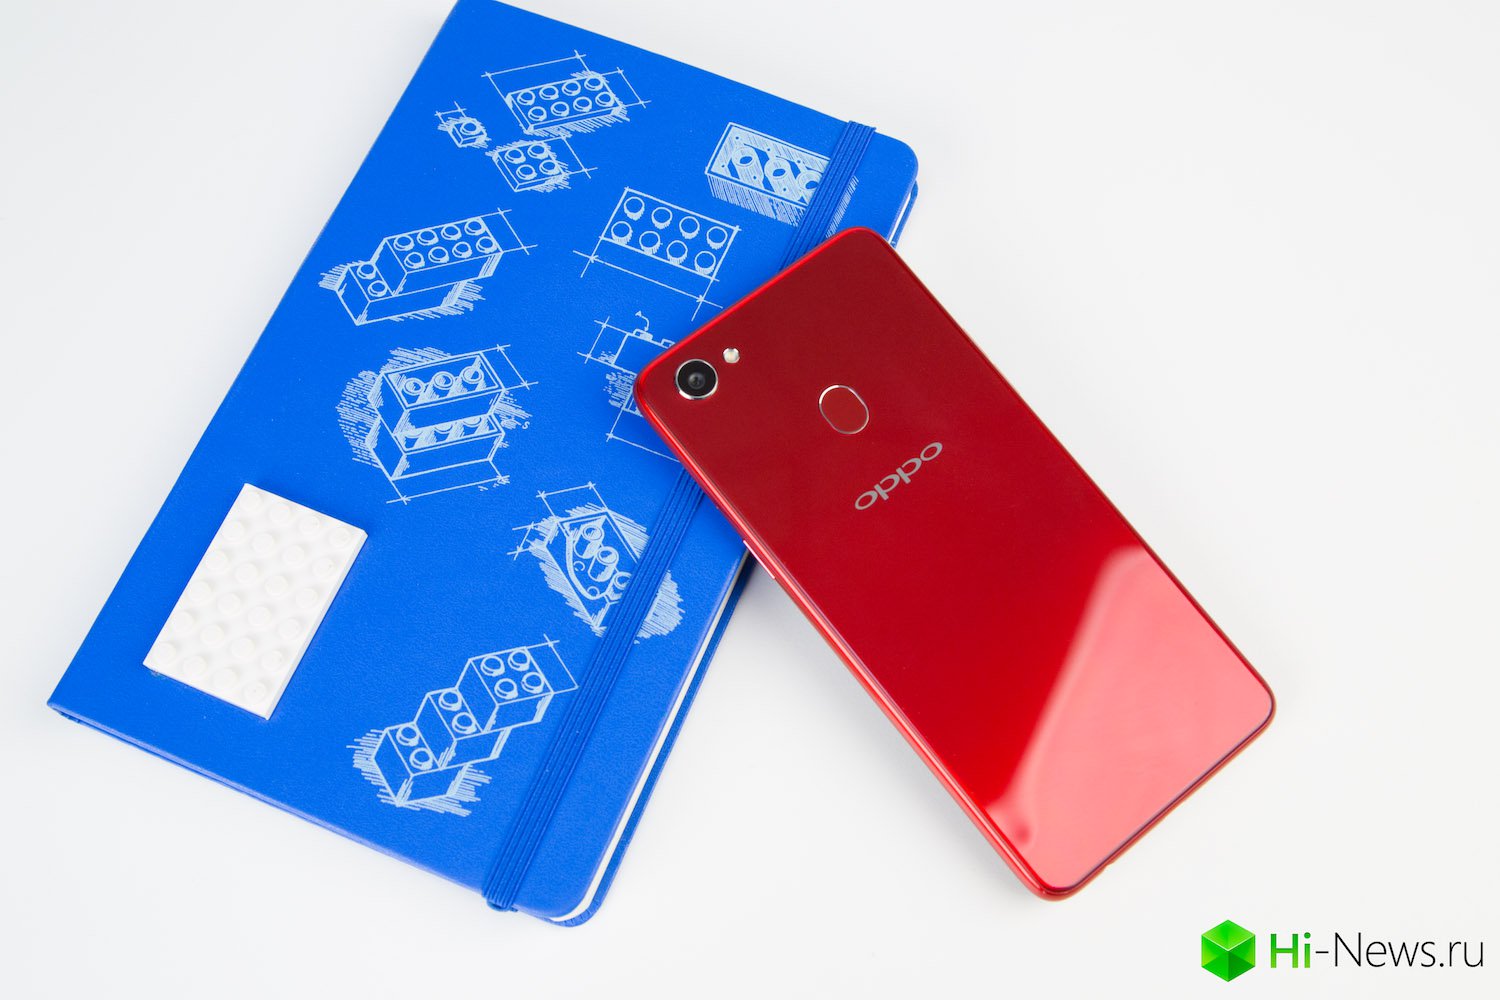 Oppo F7 — for those who love style and selfies